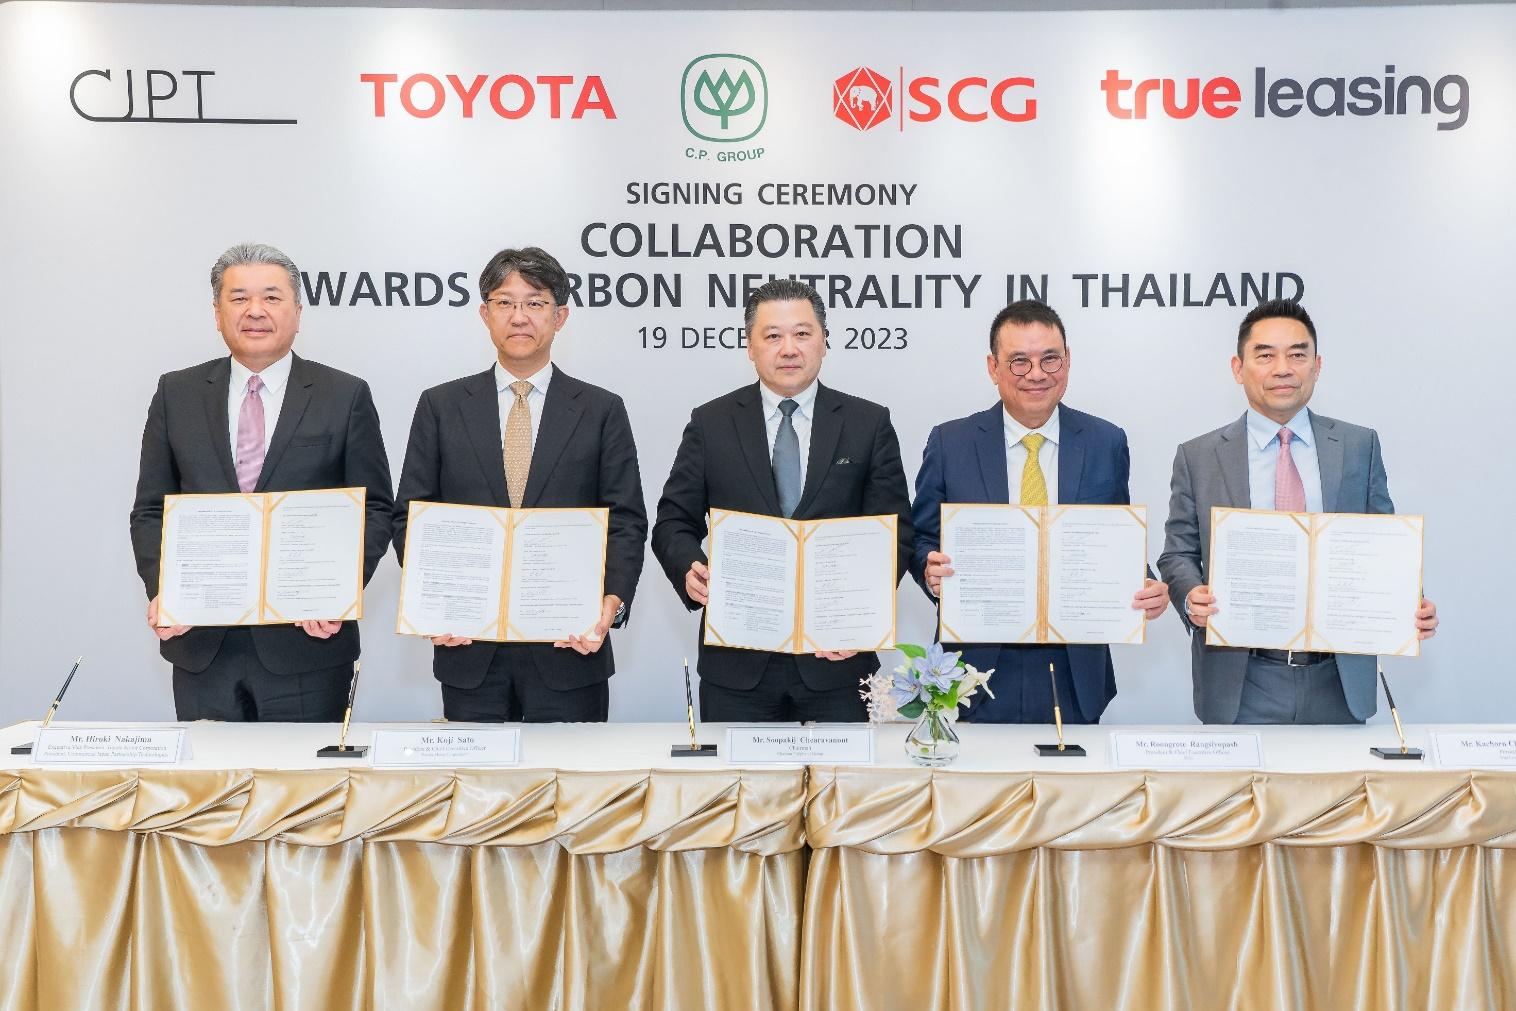 (Left to right) Hiroki Nakajima, President of CJPT; Koji Sato, President and CEO of Toyota; Soopakij Chearavanont, Chairman of CP;Roongrote Rangsiyopash, President and CEO of SCG; Kachorn Chiaravanont, President of True Leasing and Member of Executive Committee of CP